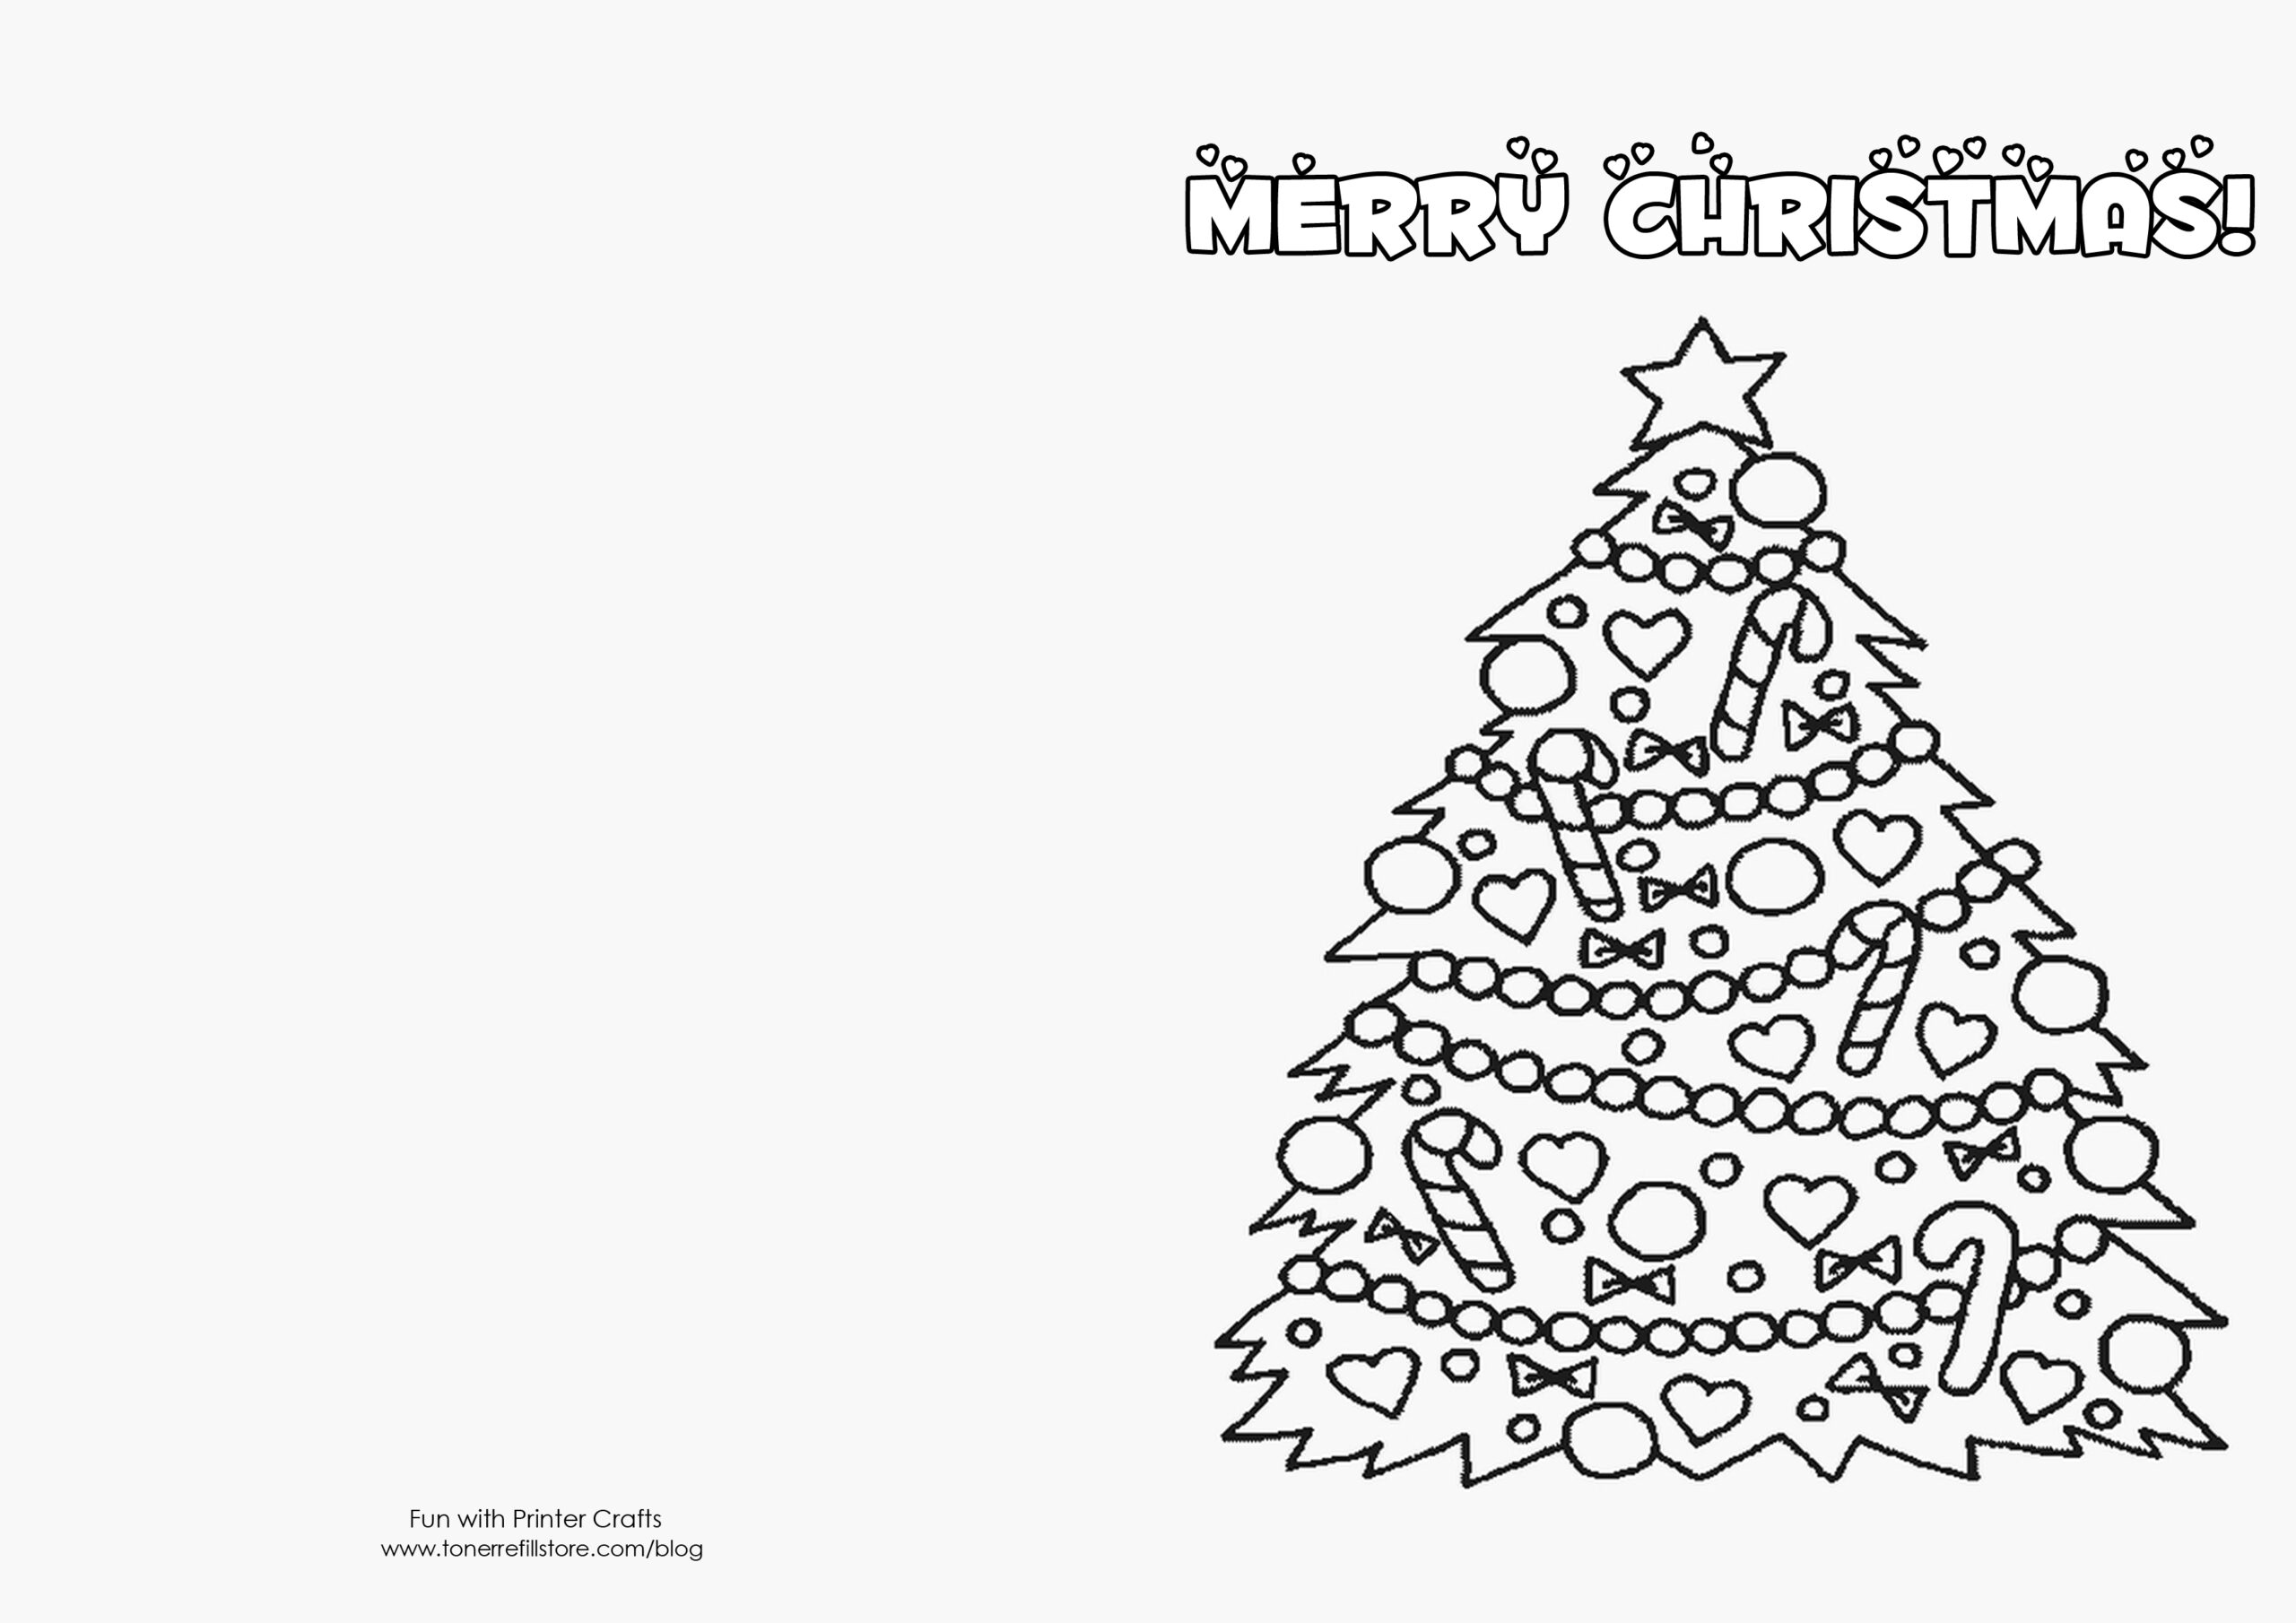 Free Printable Christmas Cards Templates – Zimer.bwong.co With Regard To Print Your Own Christmas Cards Templates